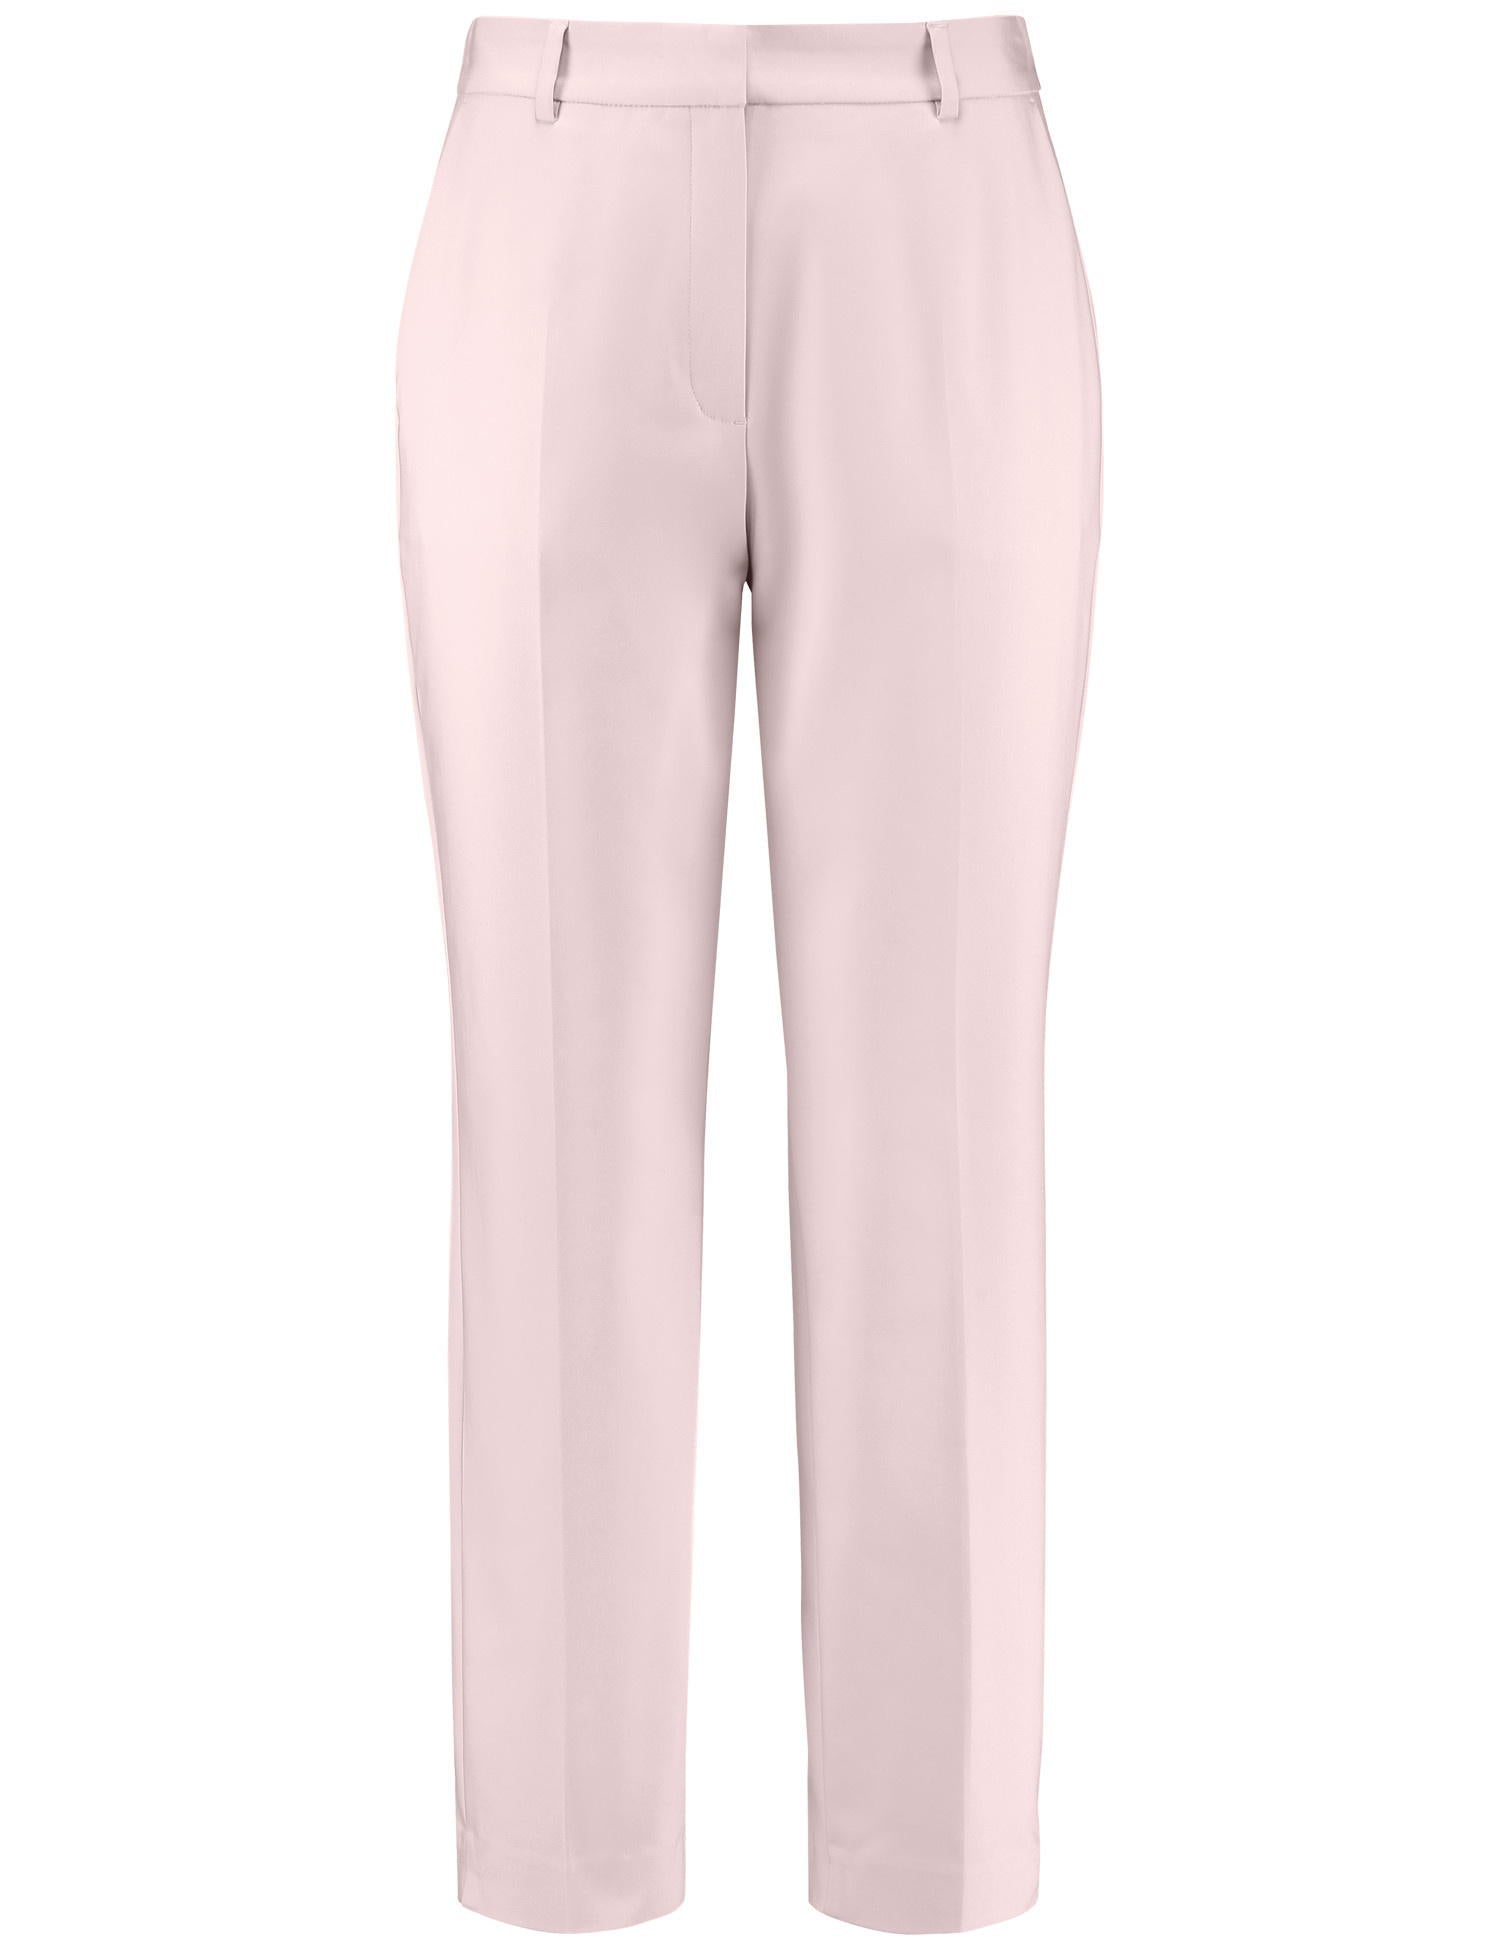 Elegant Trousers With Pressed Pleats_320006-31335_30289_02